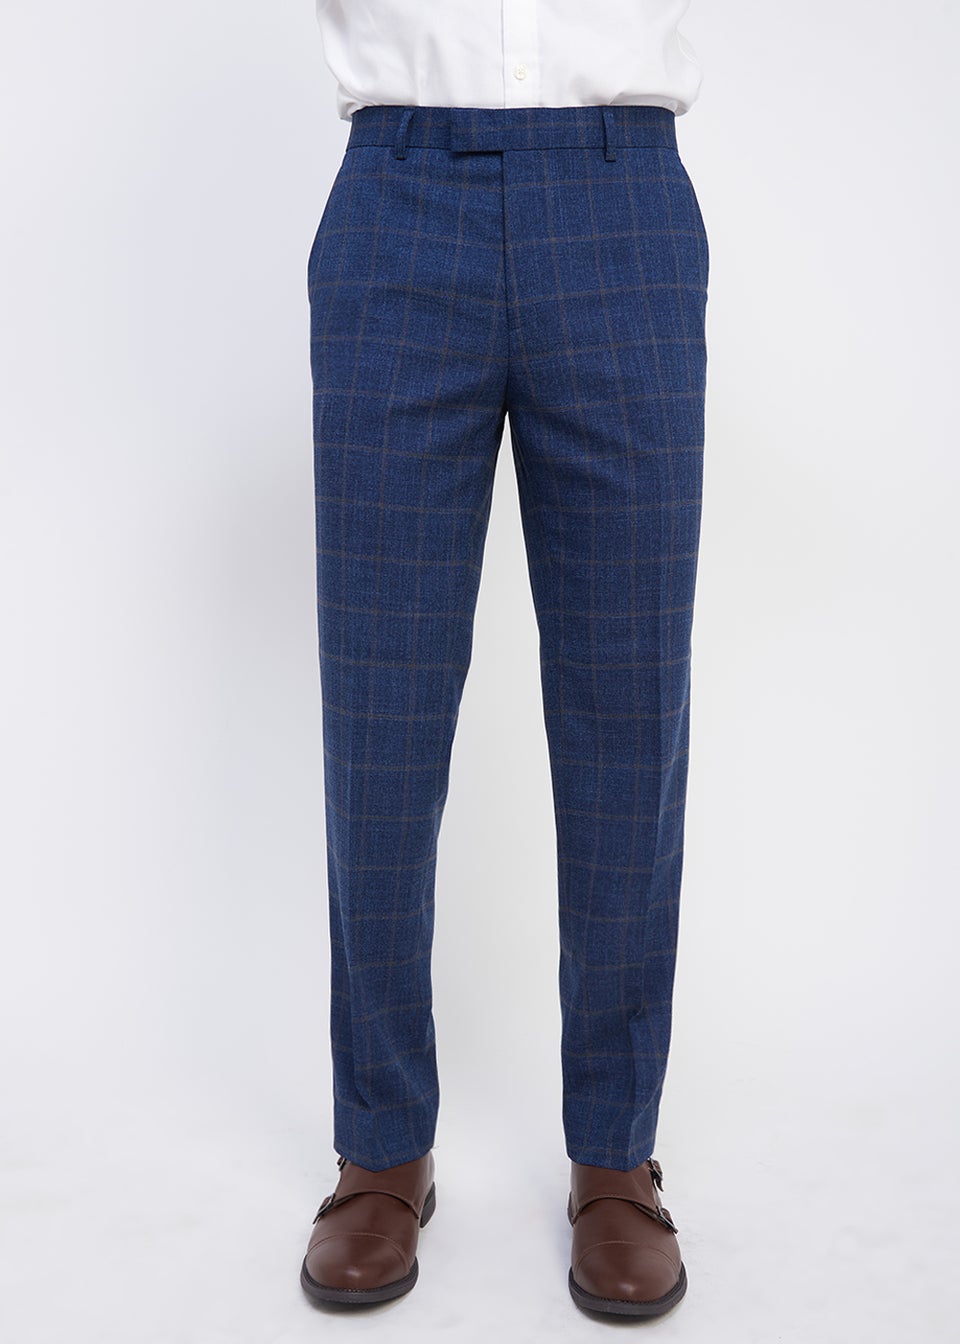 Taylor  Wright Orwell Navy Tailored Fit Suit Trousers  Matalan